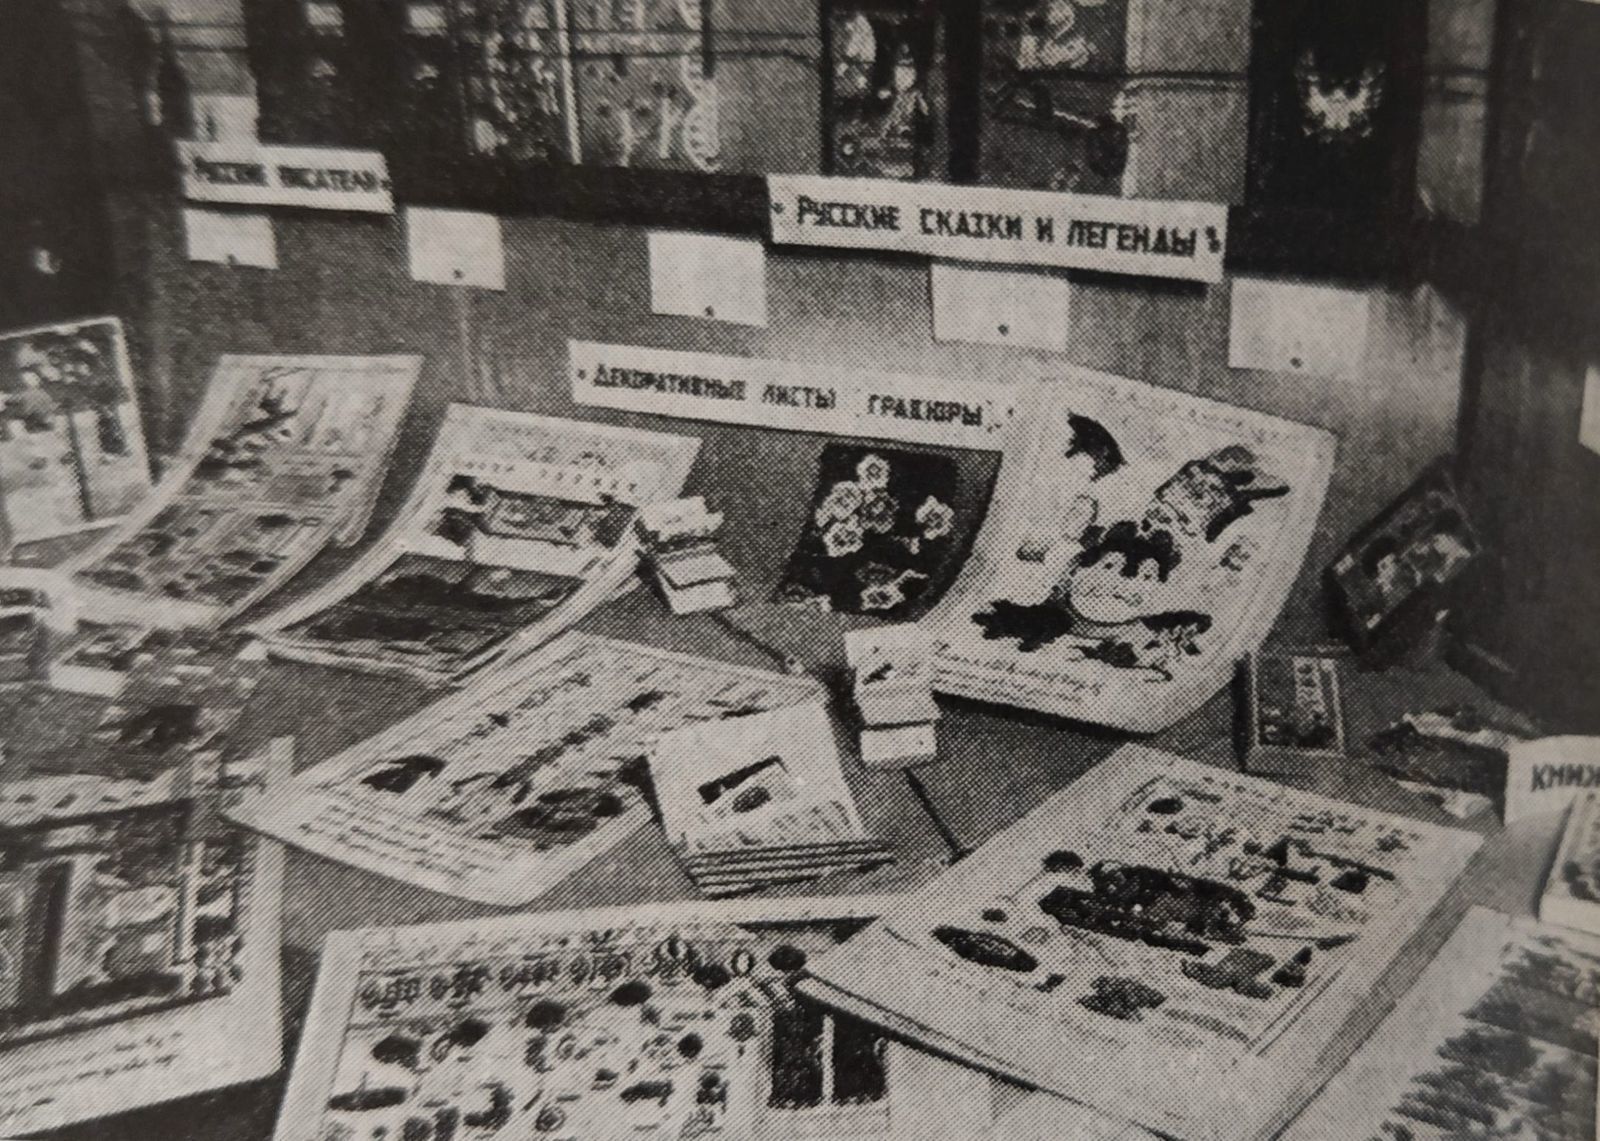 Part of the Exhibition of Japanese Children’s Literature and Children’s Creativity, Moscow, 1928. Illustration from the magazine Bulletin d’Information V.O.K.S., 52, 1928 Viktor Belozerov archive